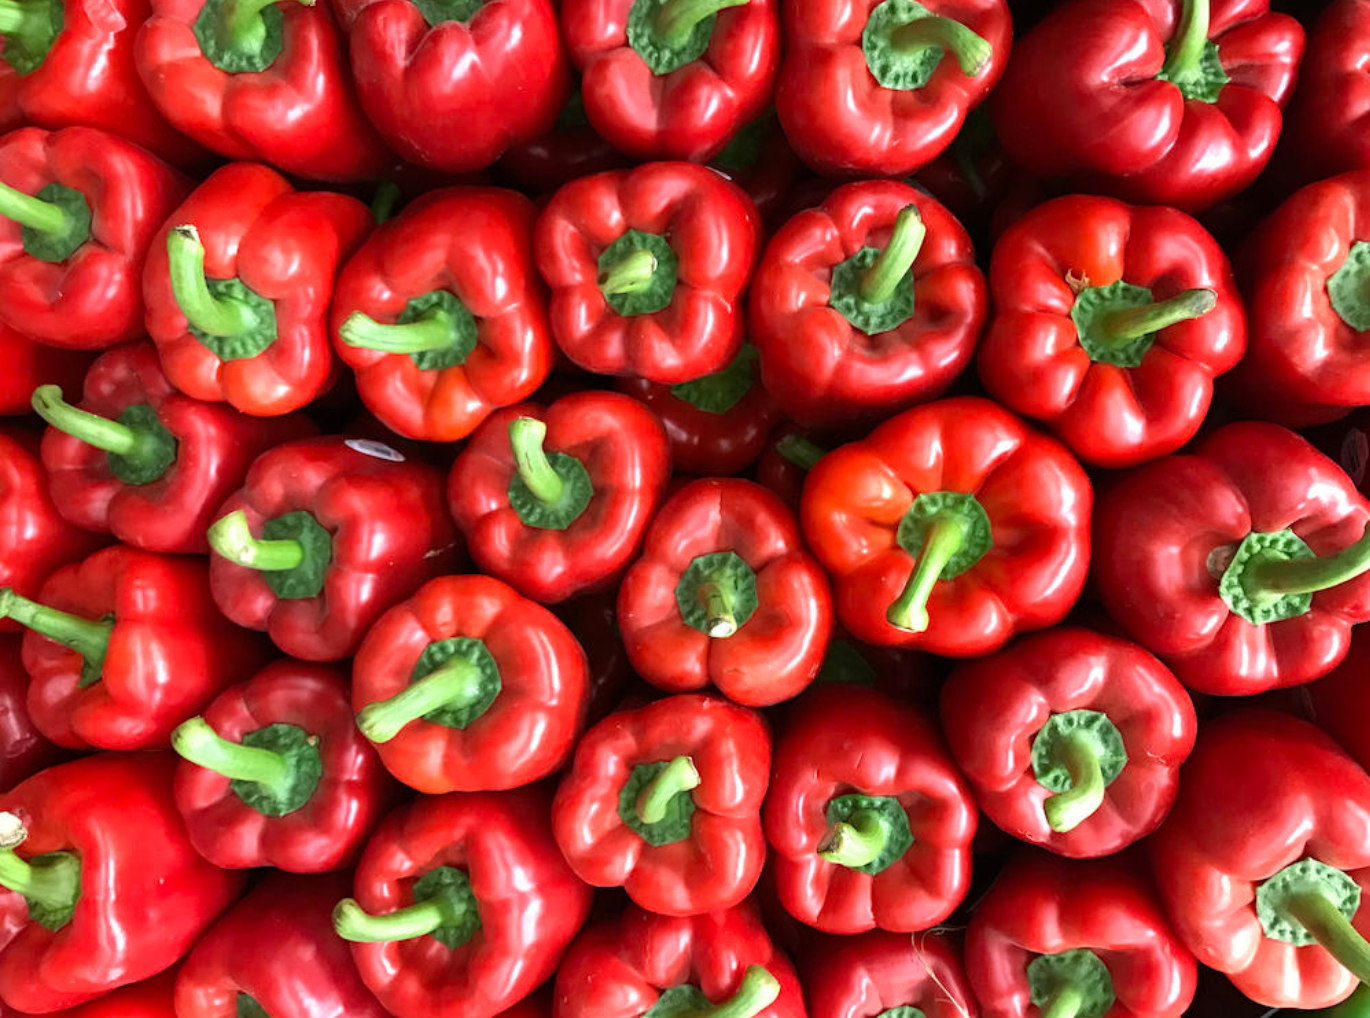 Red Bell Peppers : 3ct ORGANIC — ETC Produce & Provisions